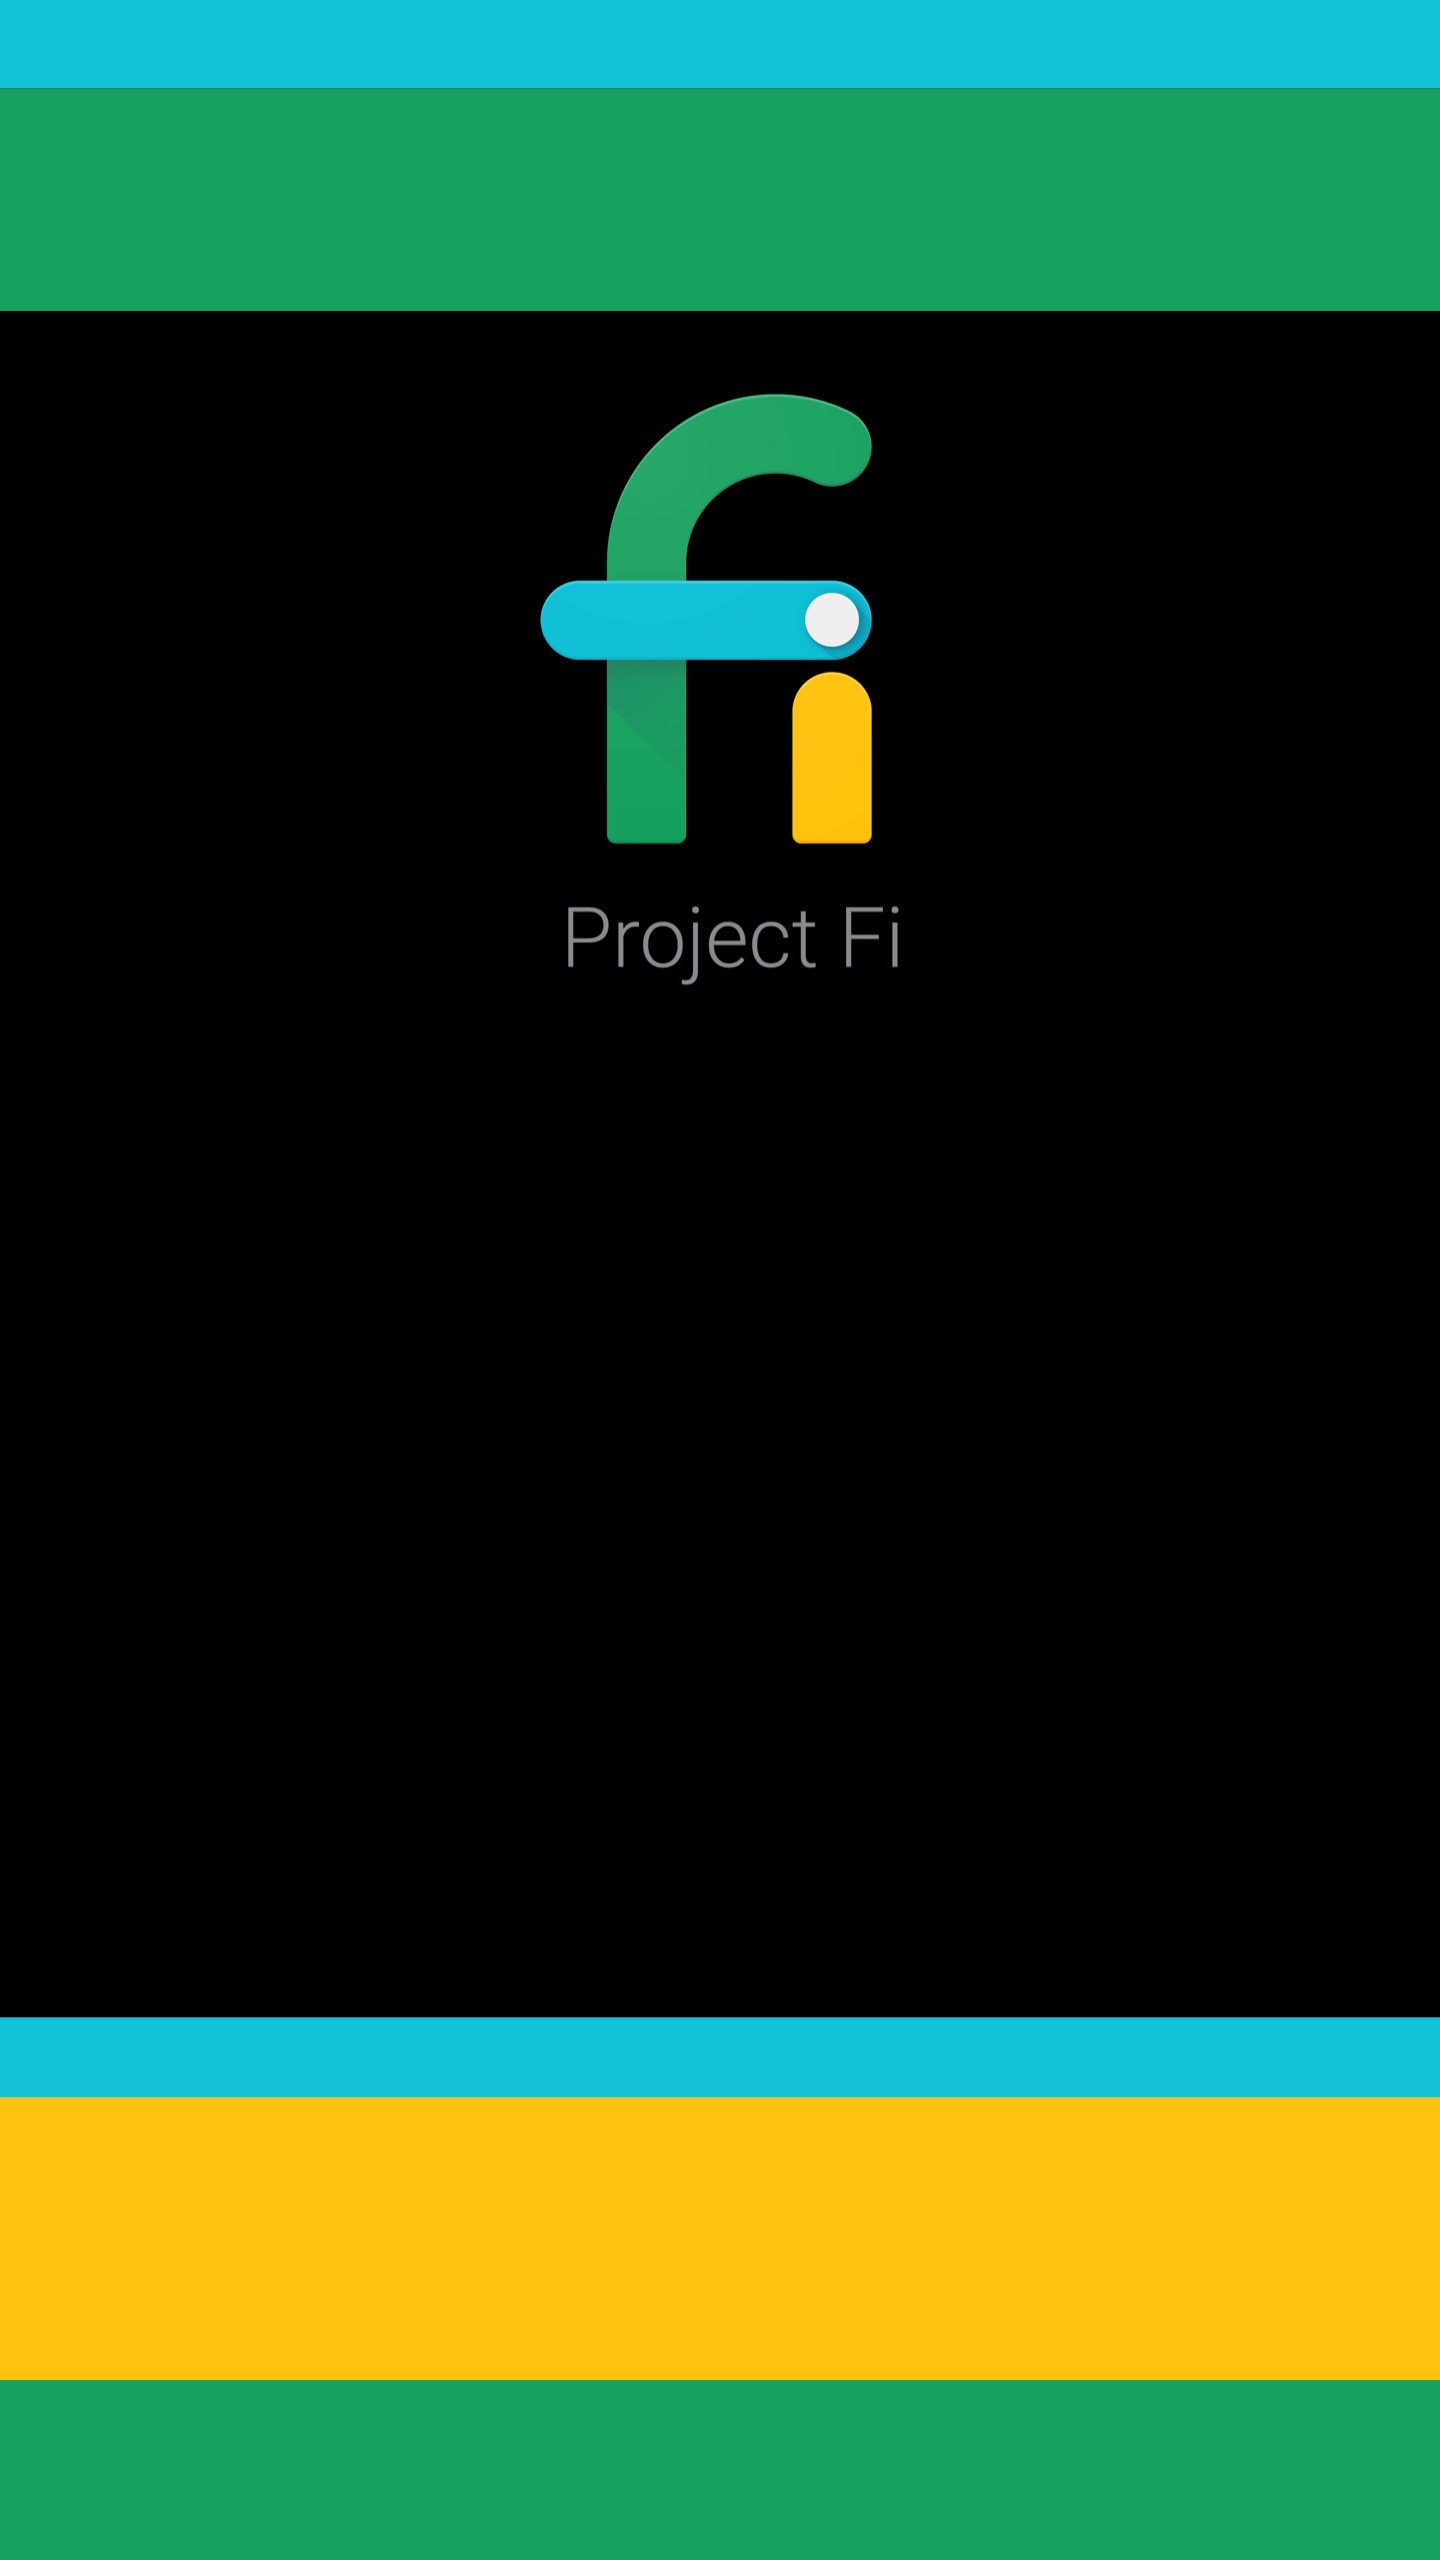 Steven Combs wallpaper that should come with the Project Fi